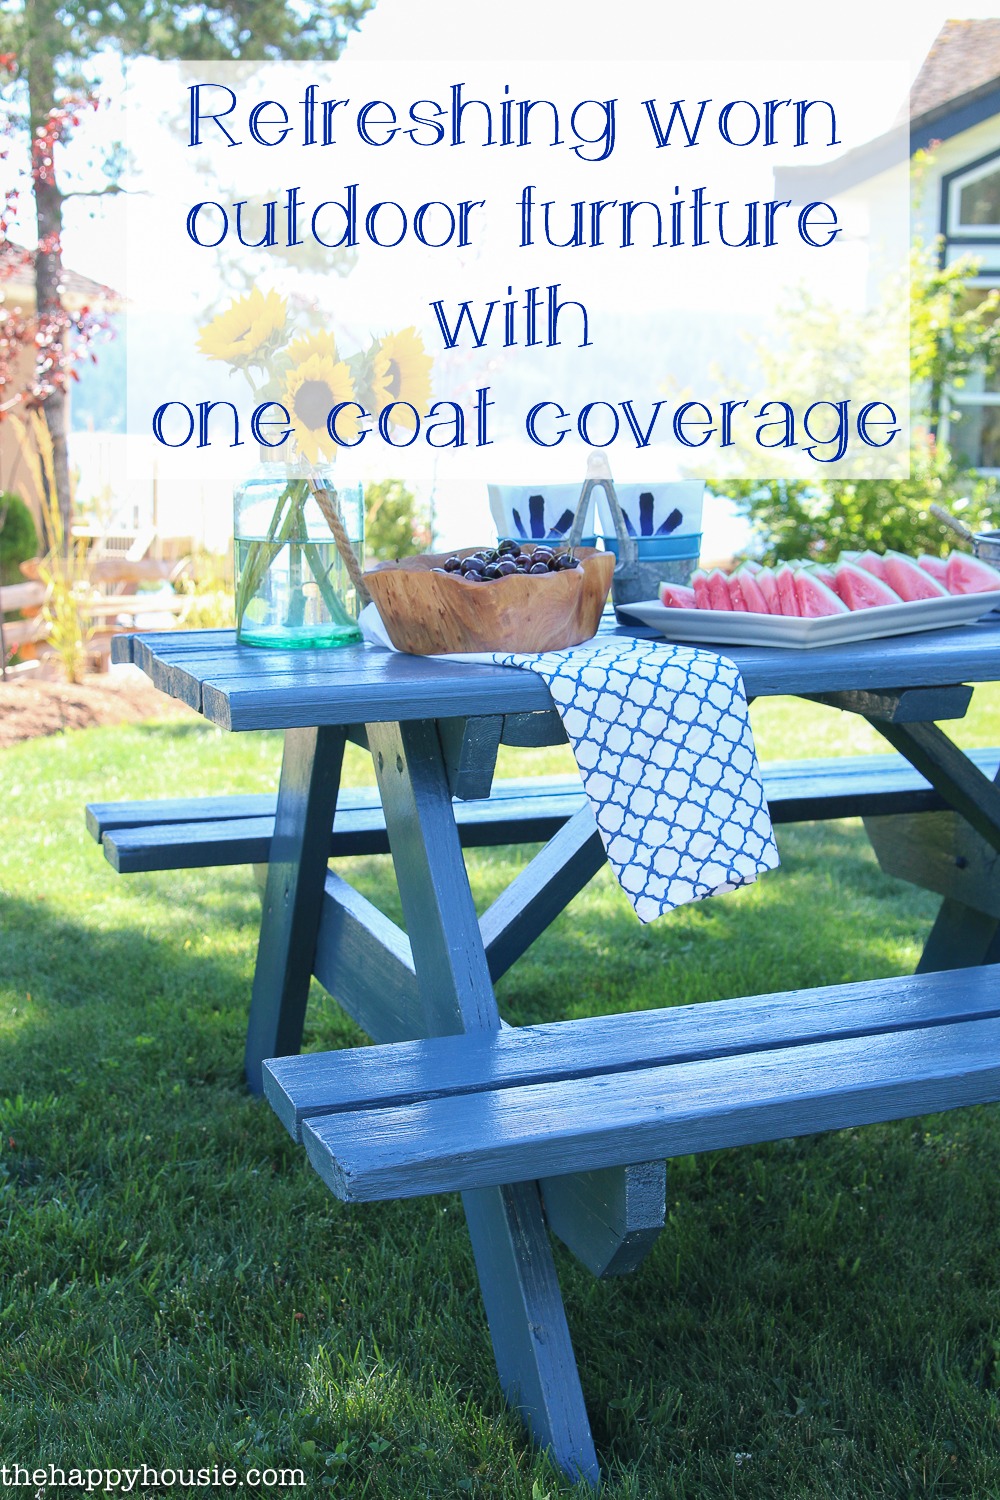 Refreshing Worn Outdoor Furniture With One Coat Coverage poster.